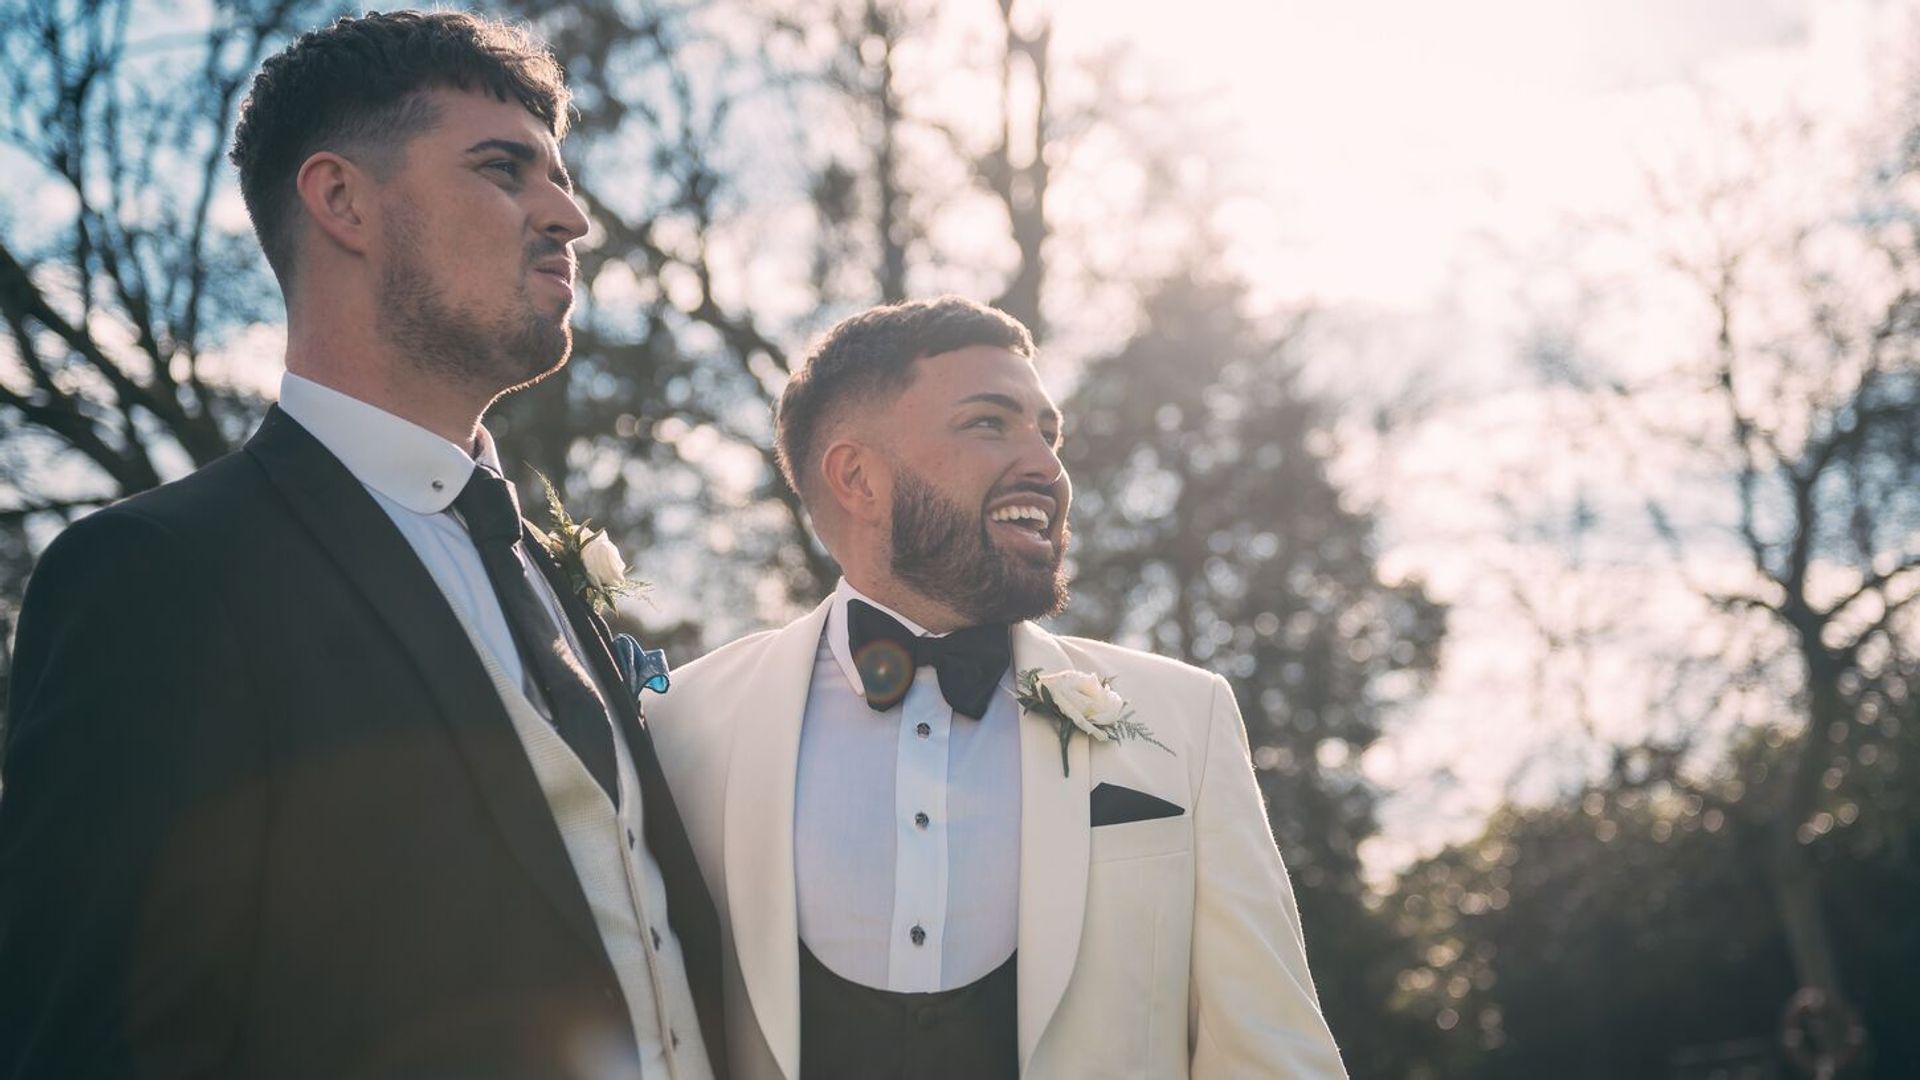 Mark and Sean on their wedding day on Married at First Sight UK